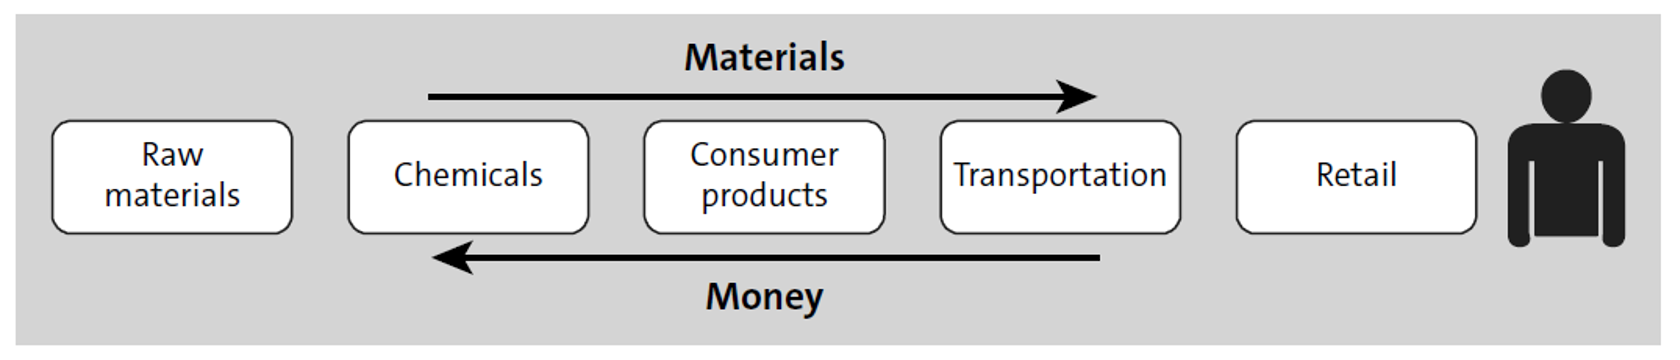 Textbook Version of Value Chain